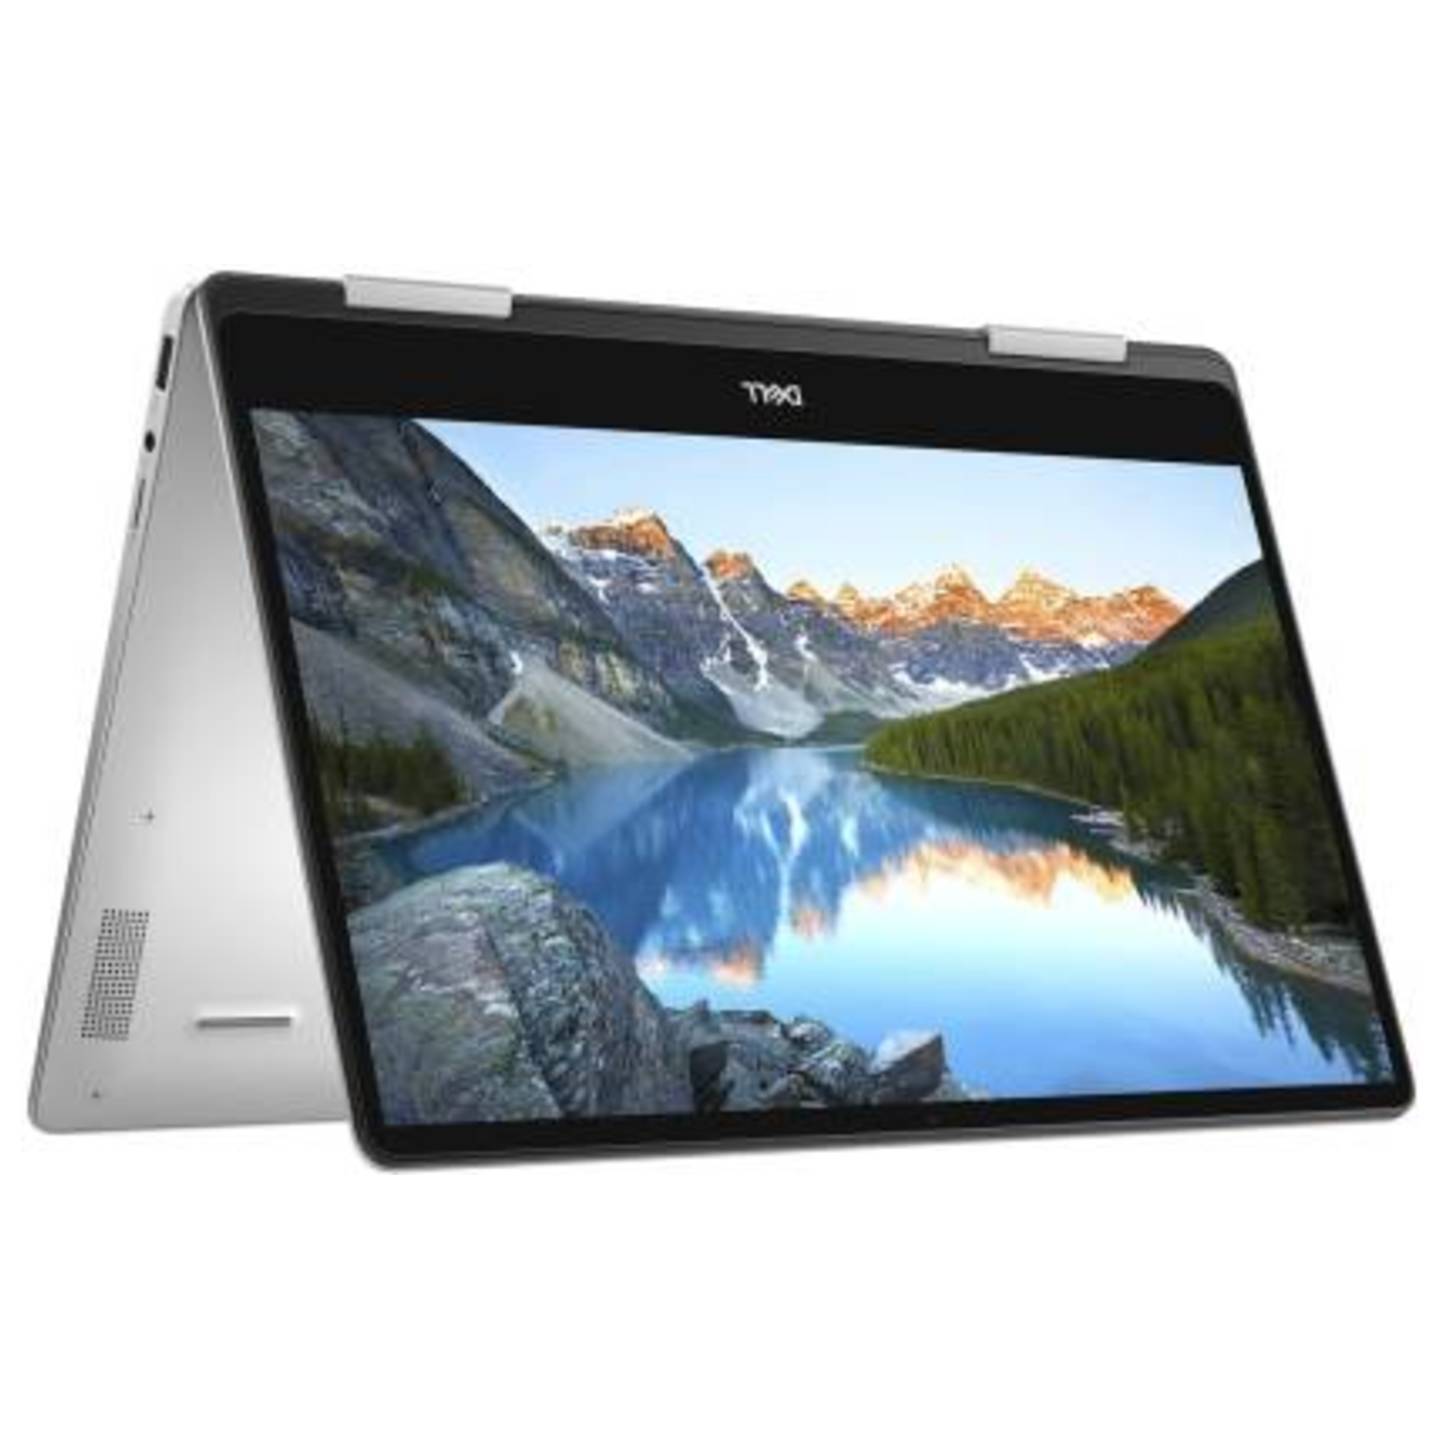 DELL Inspiron 13 7000 Series Core i7 8th Gen - (16 GB/512 GB SSD/Windows 10 Home) insp 7386 2 in 1 Laptop  (13.3 inch, Platinum Silver, 1.45 kg, With MS Office)